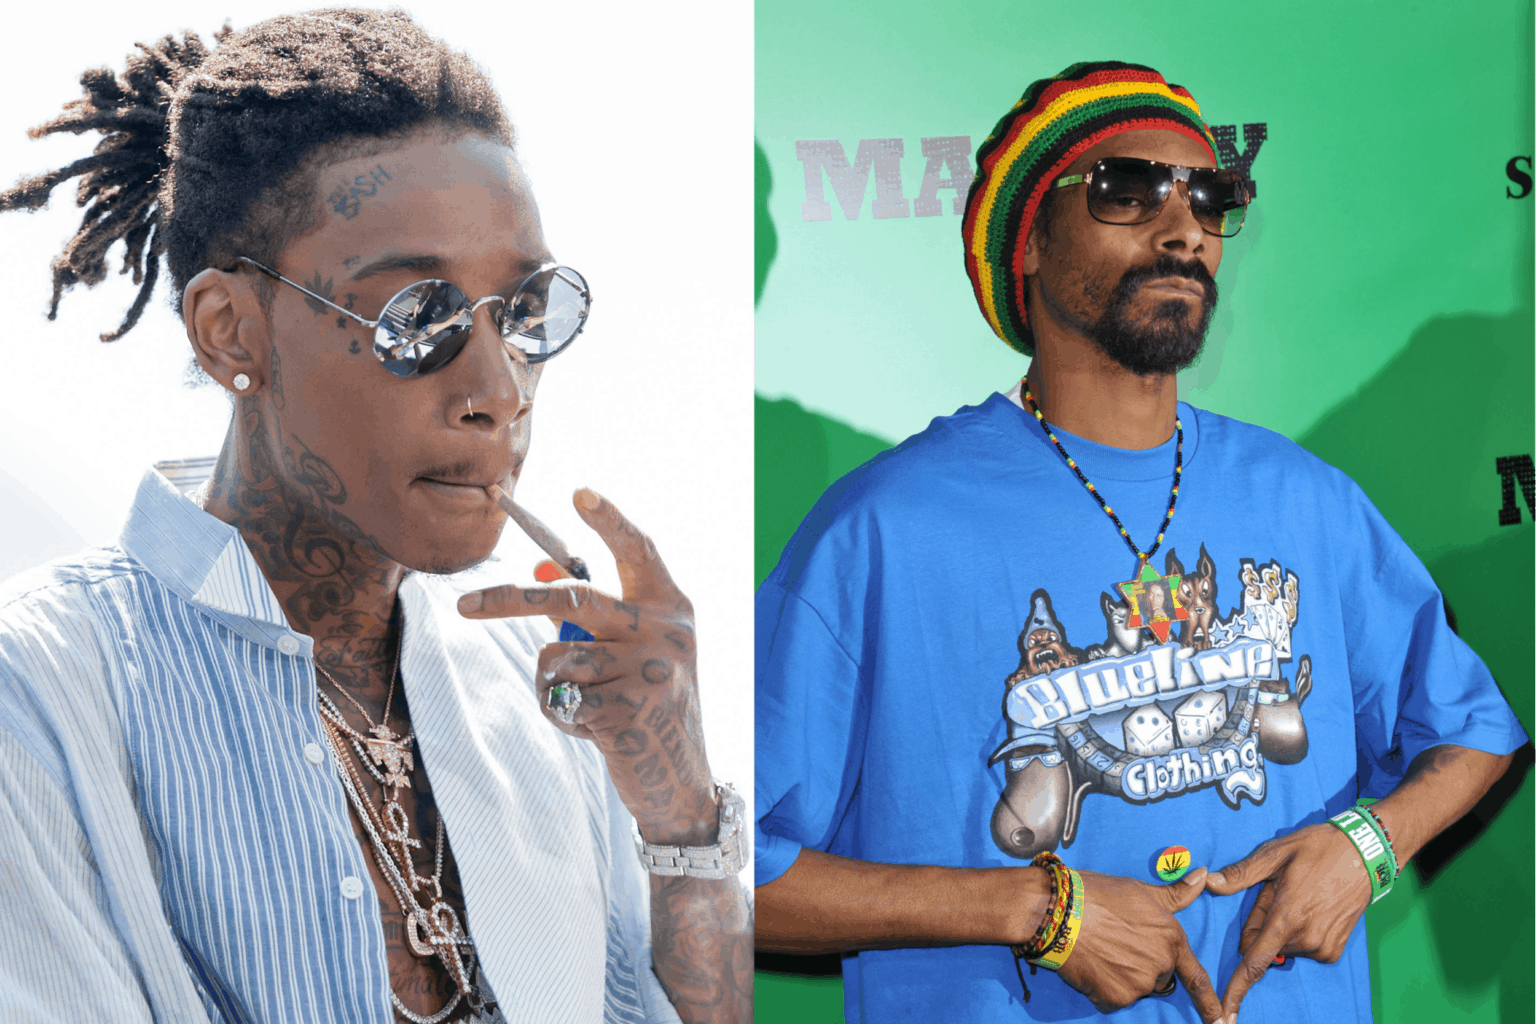 Is Wiz Khalifa Related to Snoop Dogg?